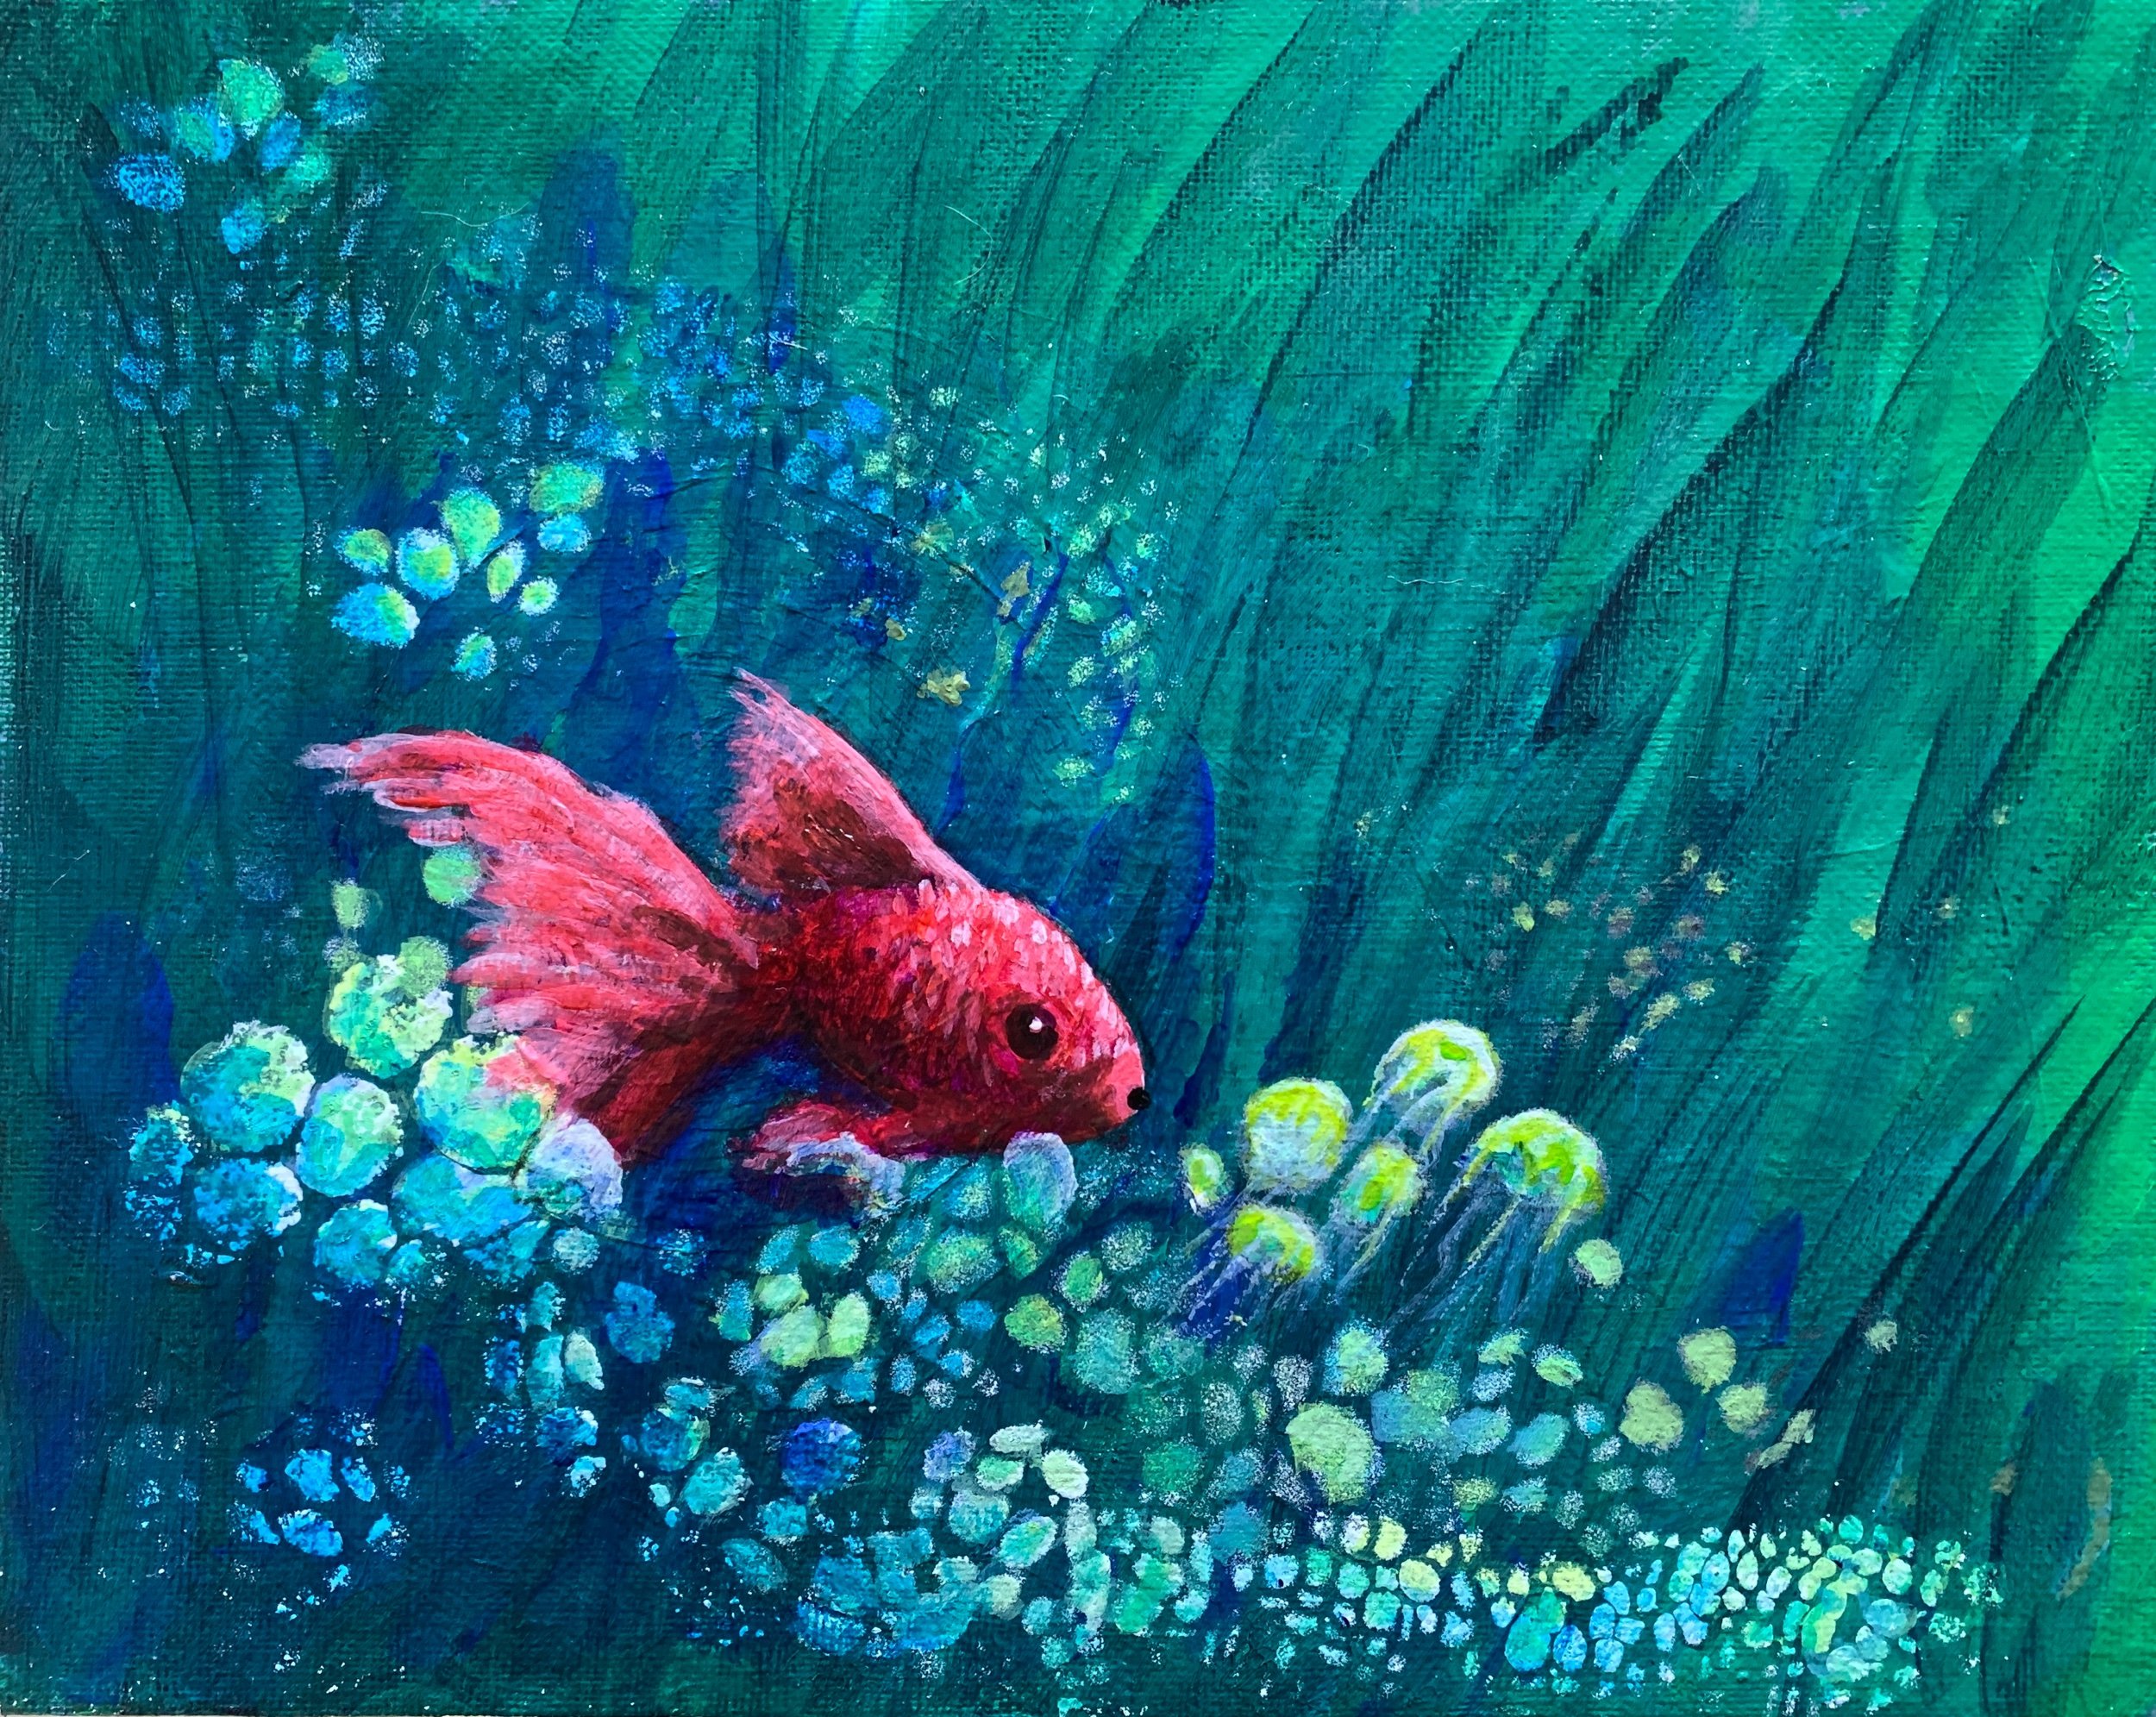 RED FISH